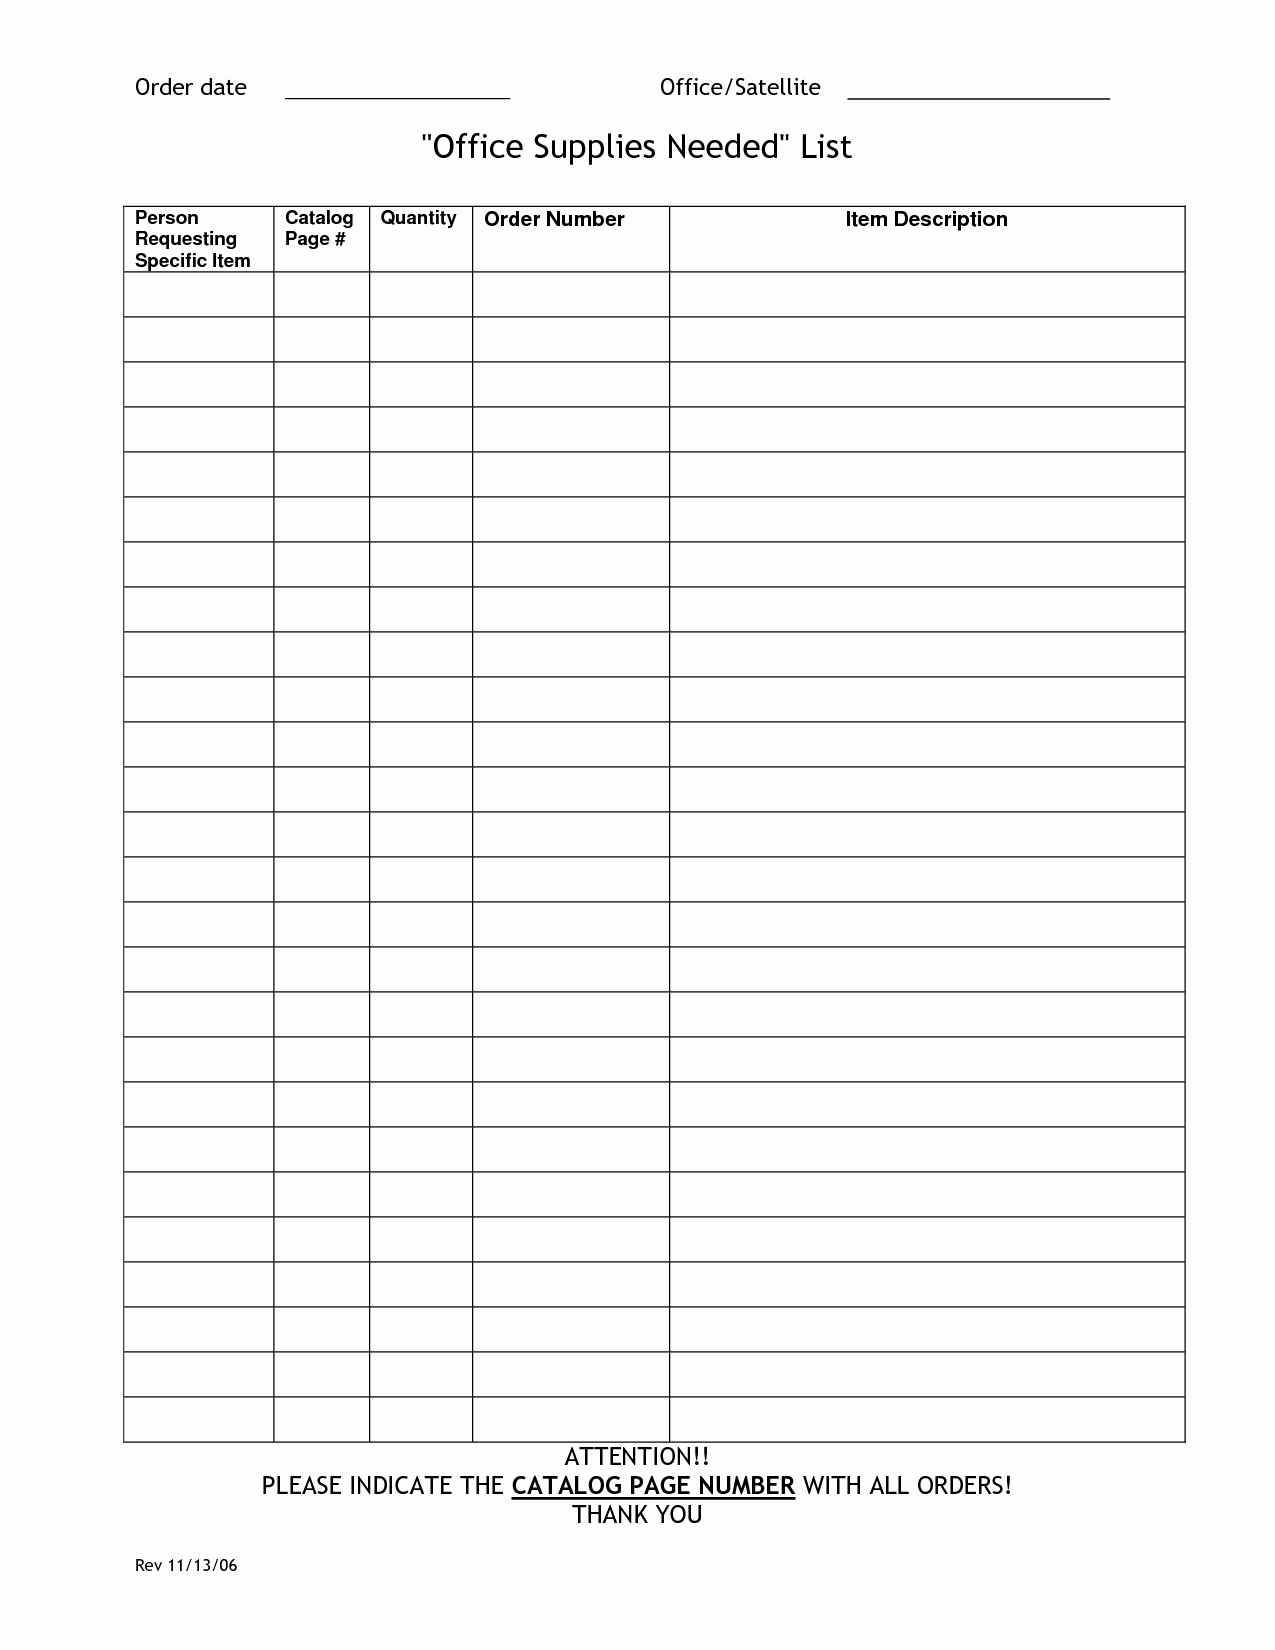 Office Supply order form Beautiful Fice Supply Check F List Supplies Needed form Suppy Lists